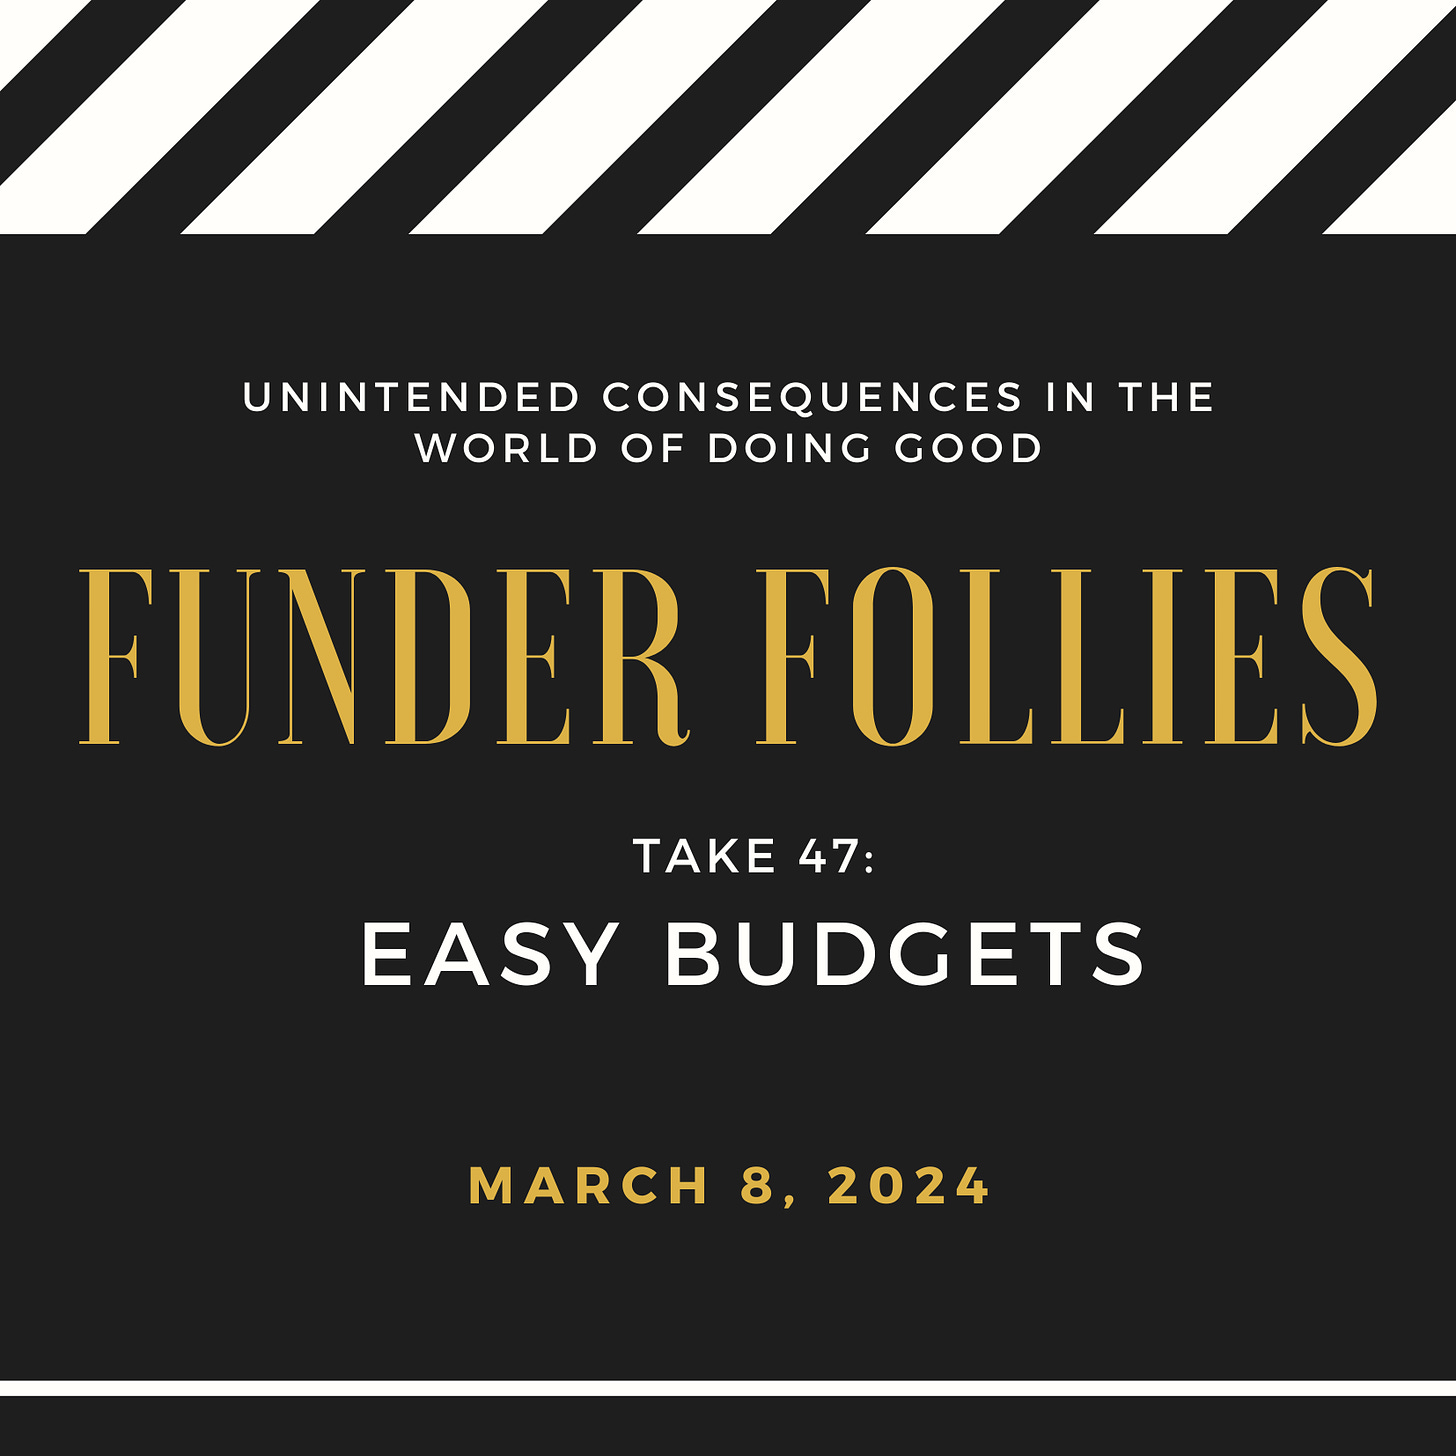 black and white film clapper board showing Funder Follies, Unintended Consequences of Doing Good, Take #47: Easy Budgets, March 8, 2024